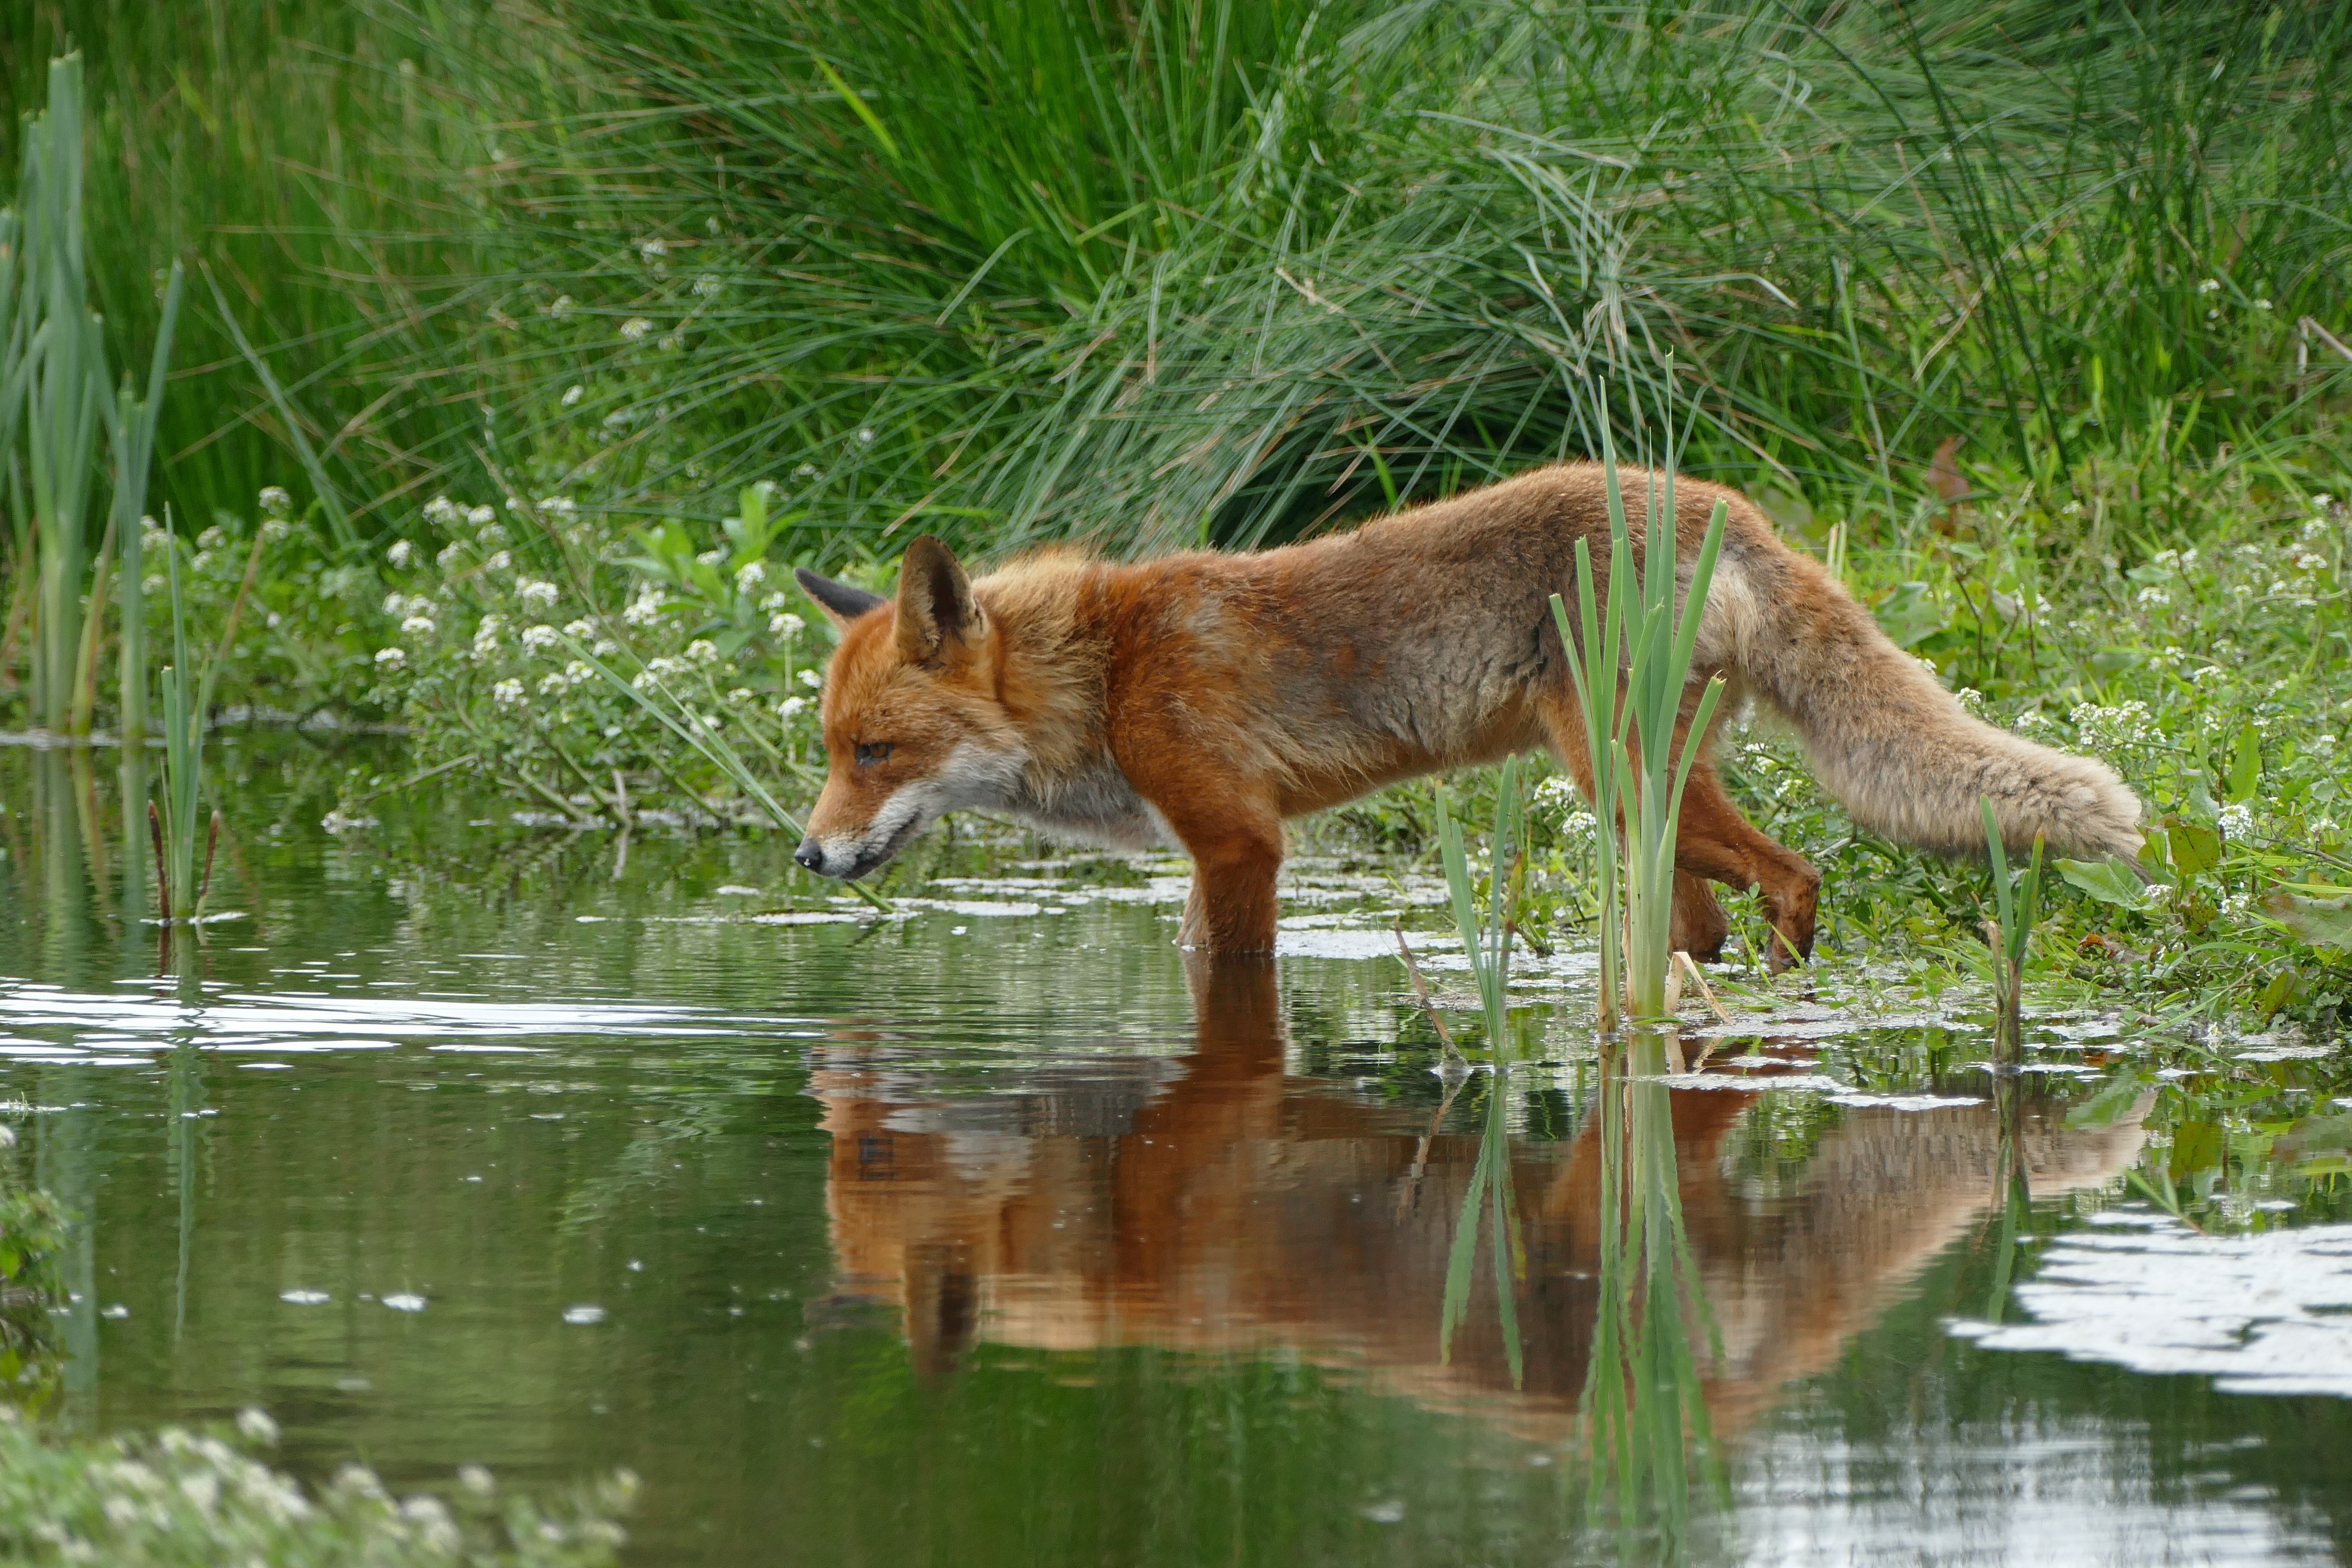 Tan and orange fox standing in water near the grass photo